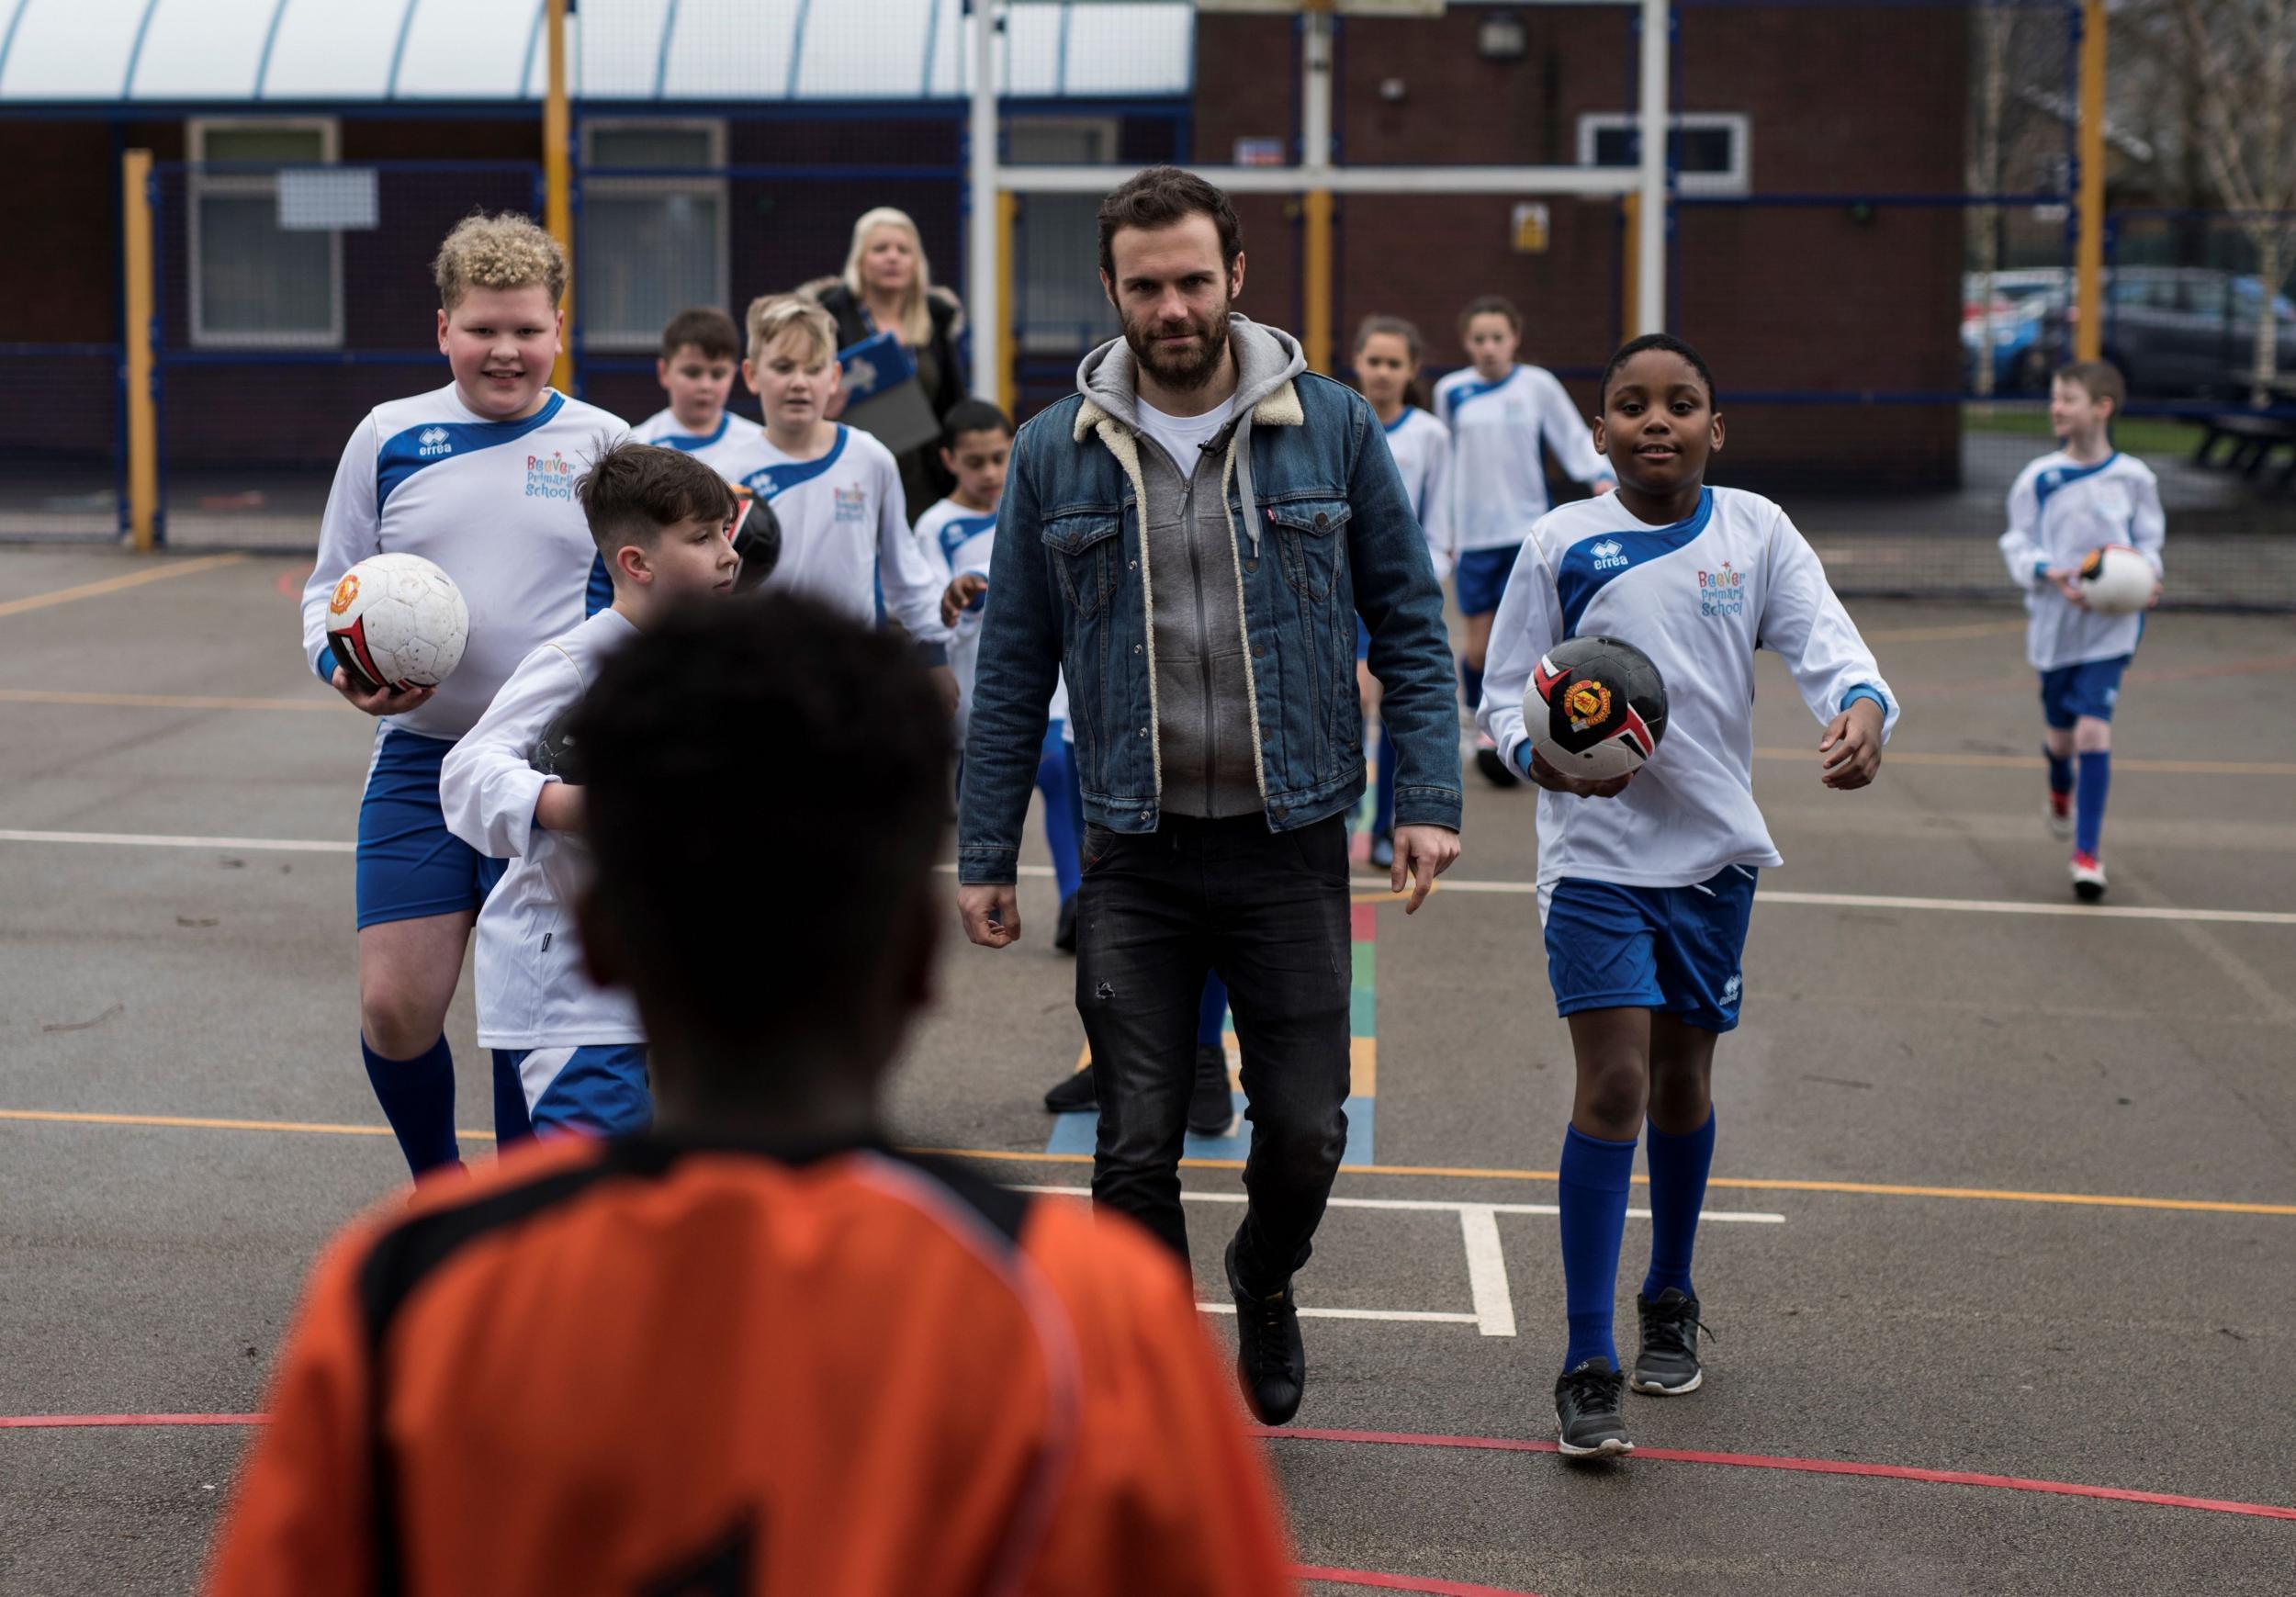 The Premier League has done brilliant work in getting more and more children active within communities